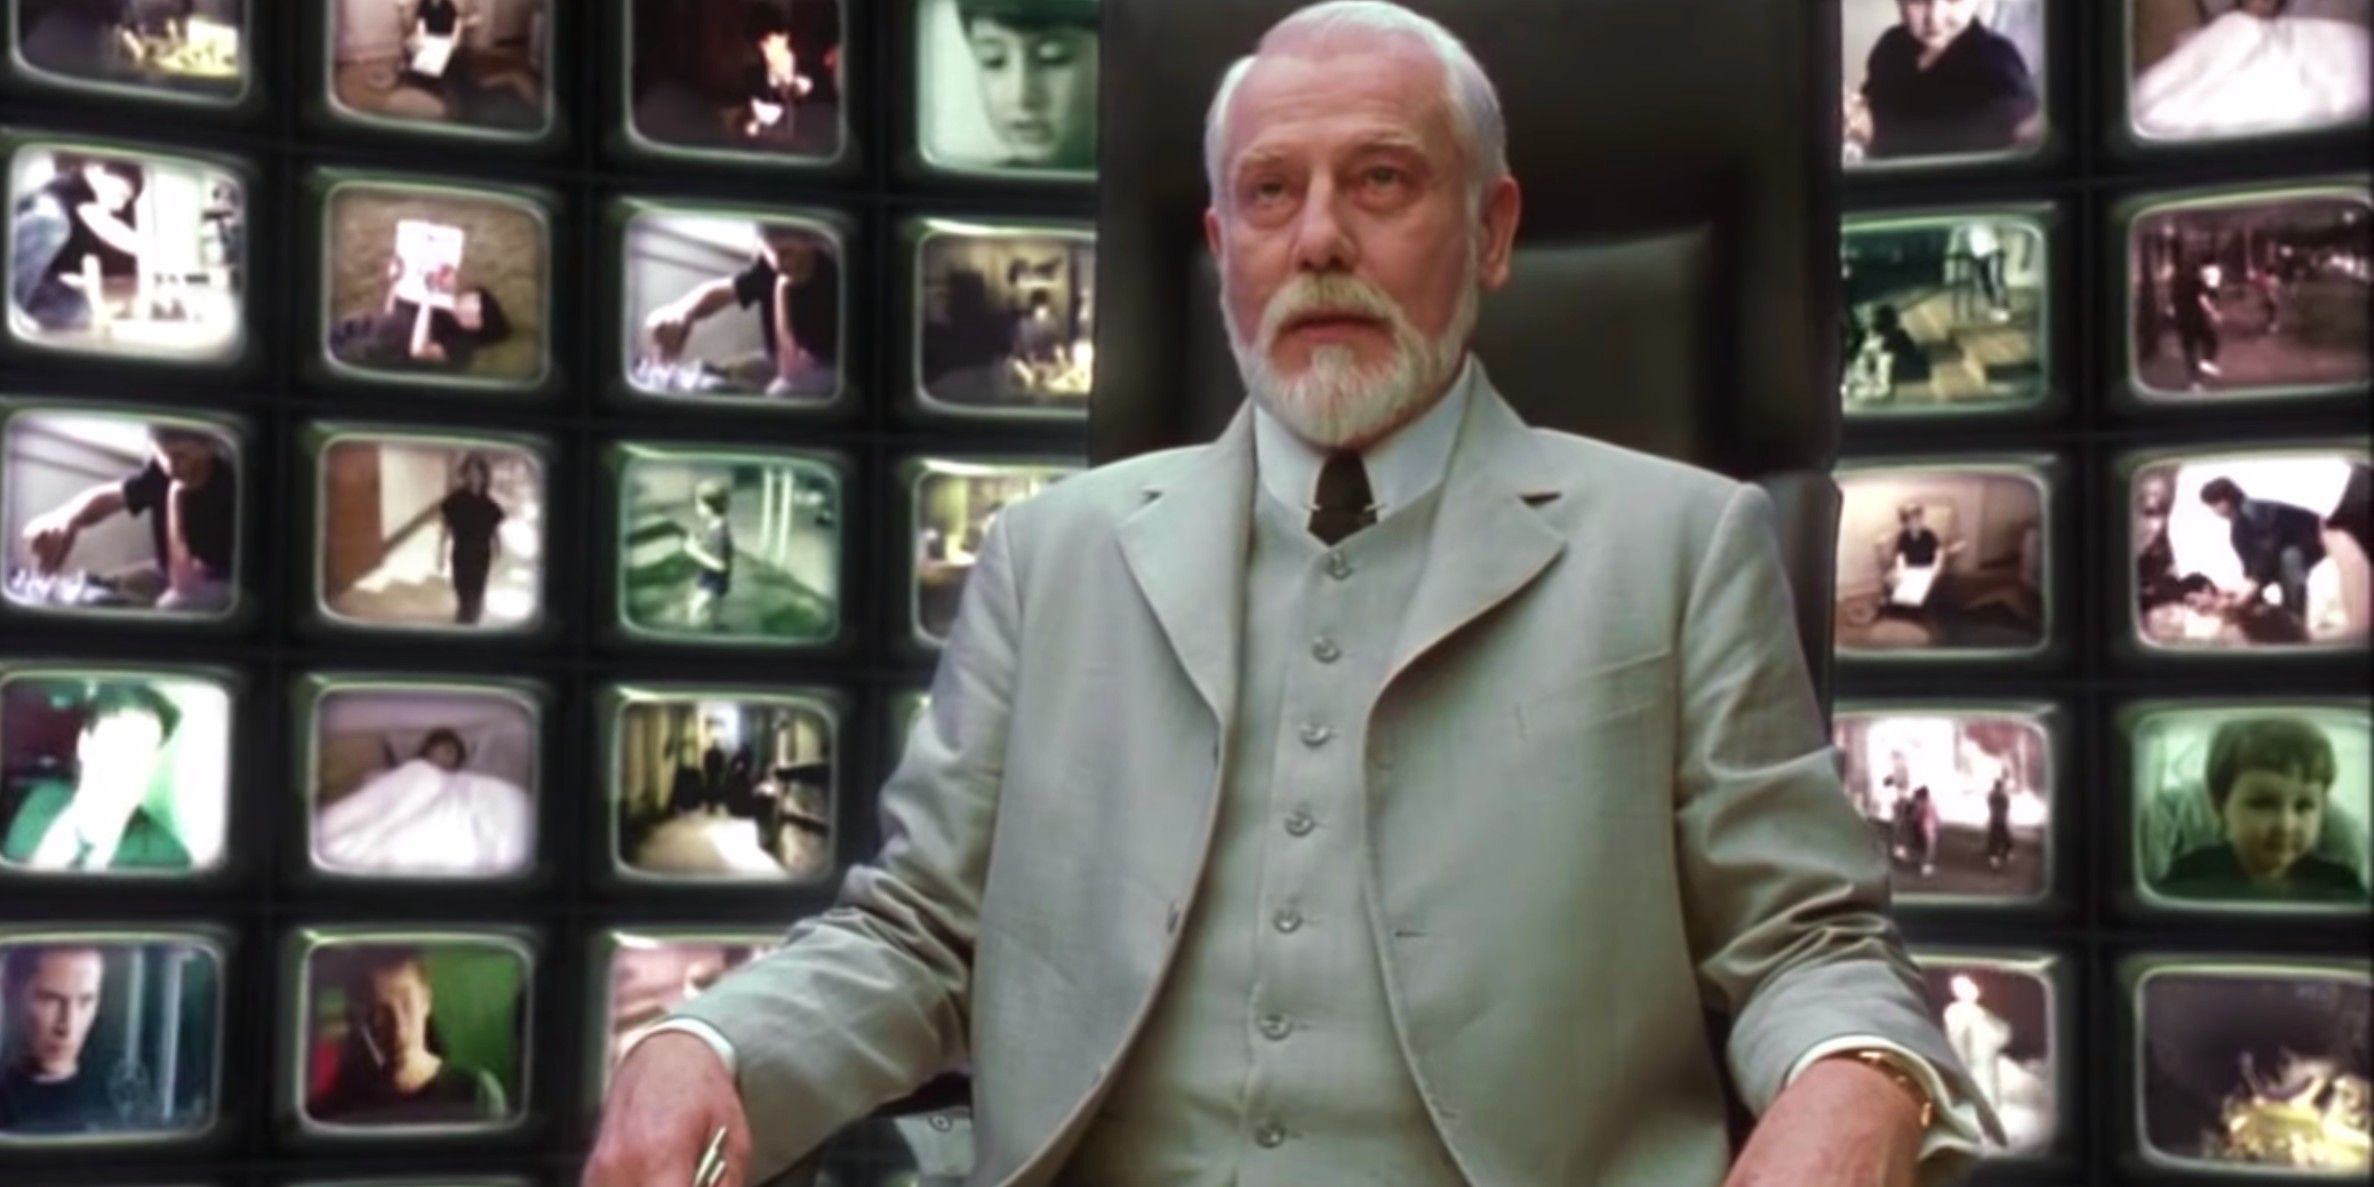 The architect sits in front of dozens of small TV screens in The Matrix Revolutions